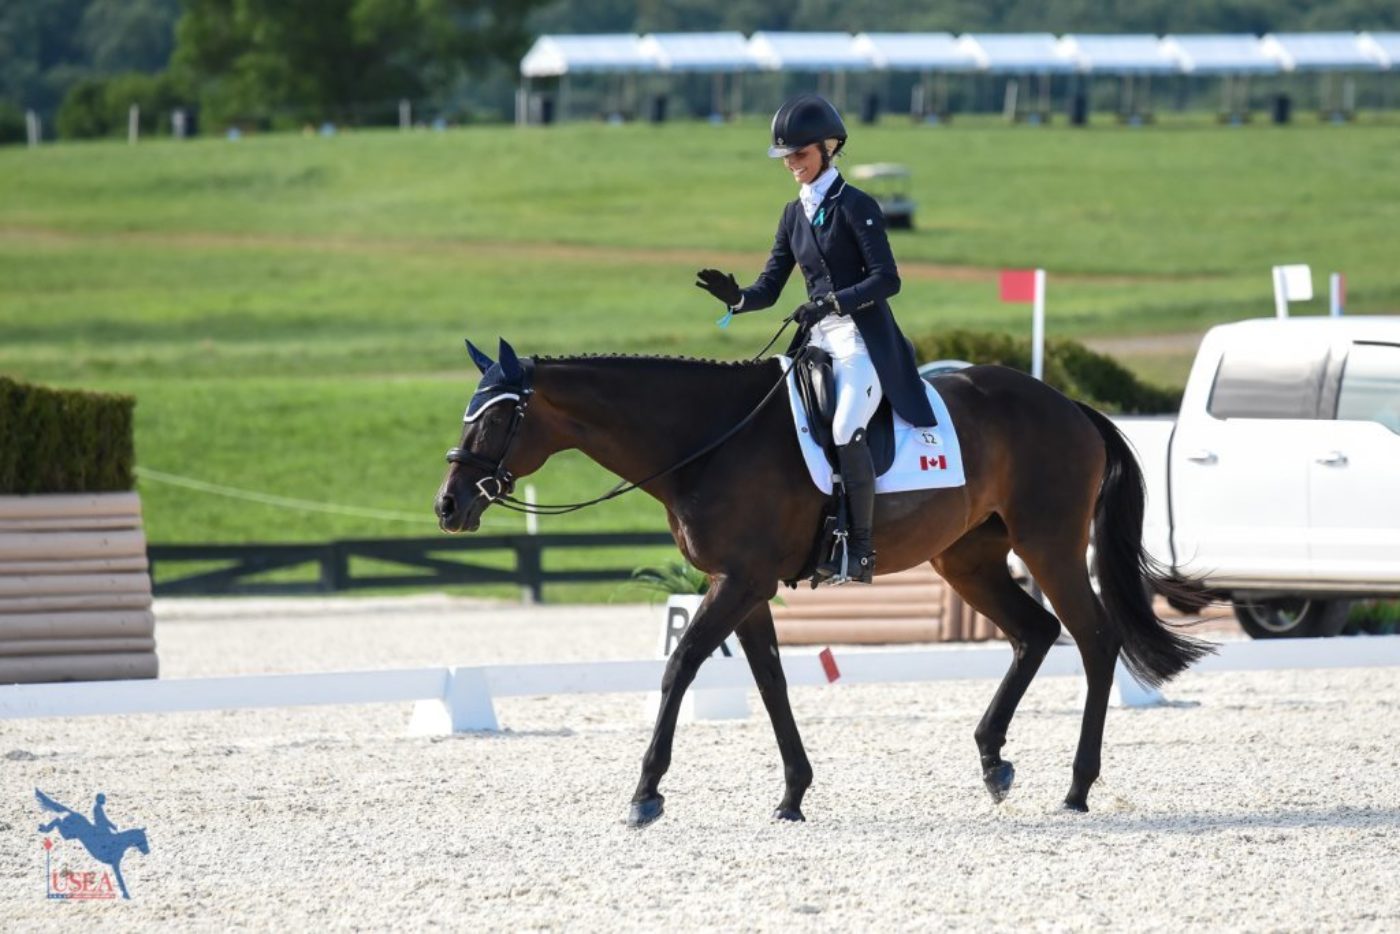 Shelby Brost loving on Crimson after their dressage test. USEA/Jessica Duffy Photo.